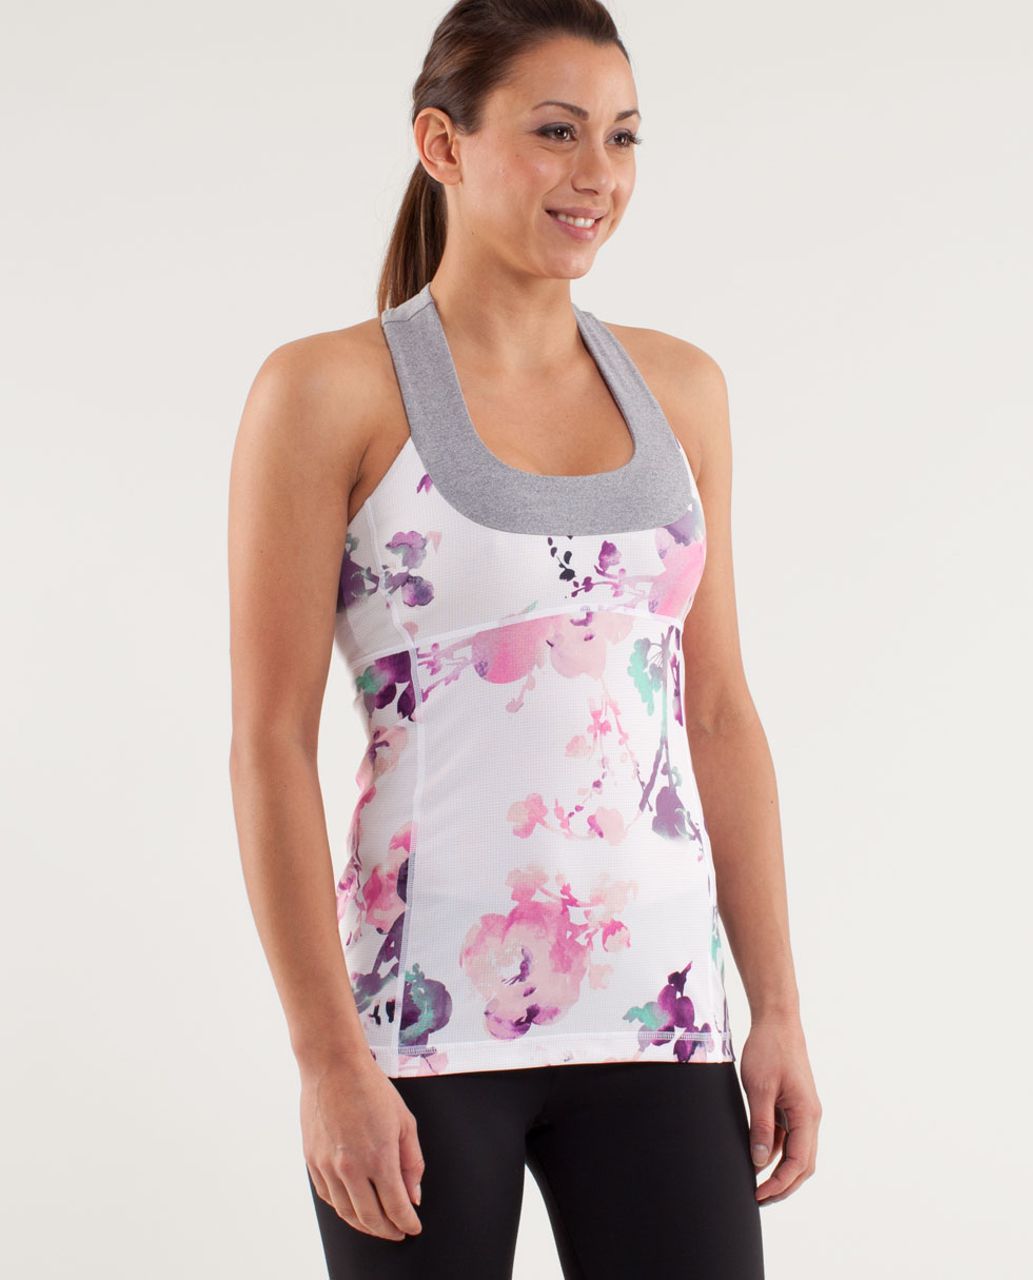 Lululemon Scoop Neck Tank - Blurred Blossoms White  /  Heathered Fossil